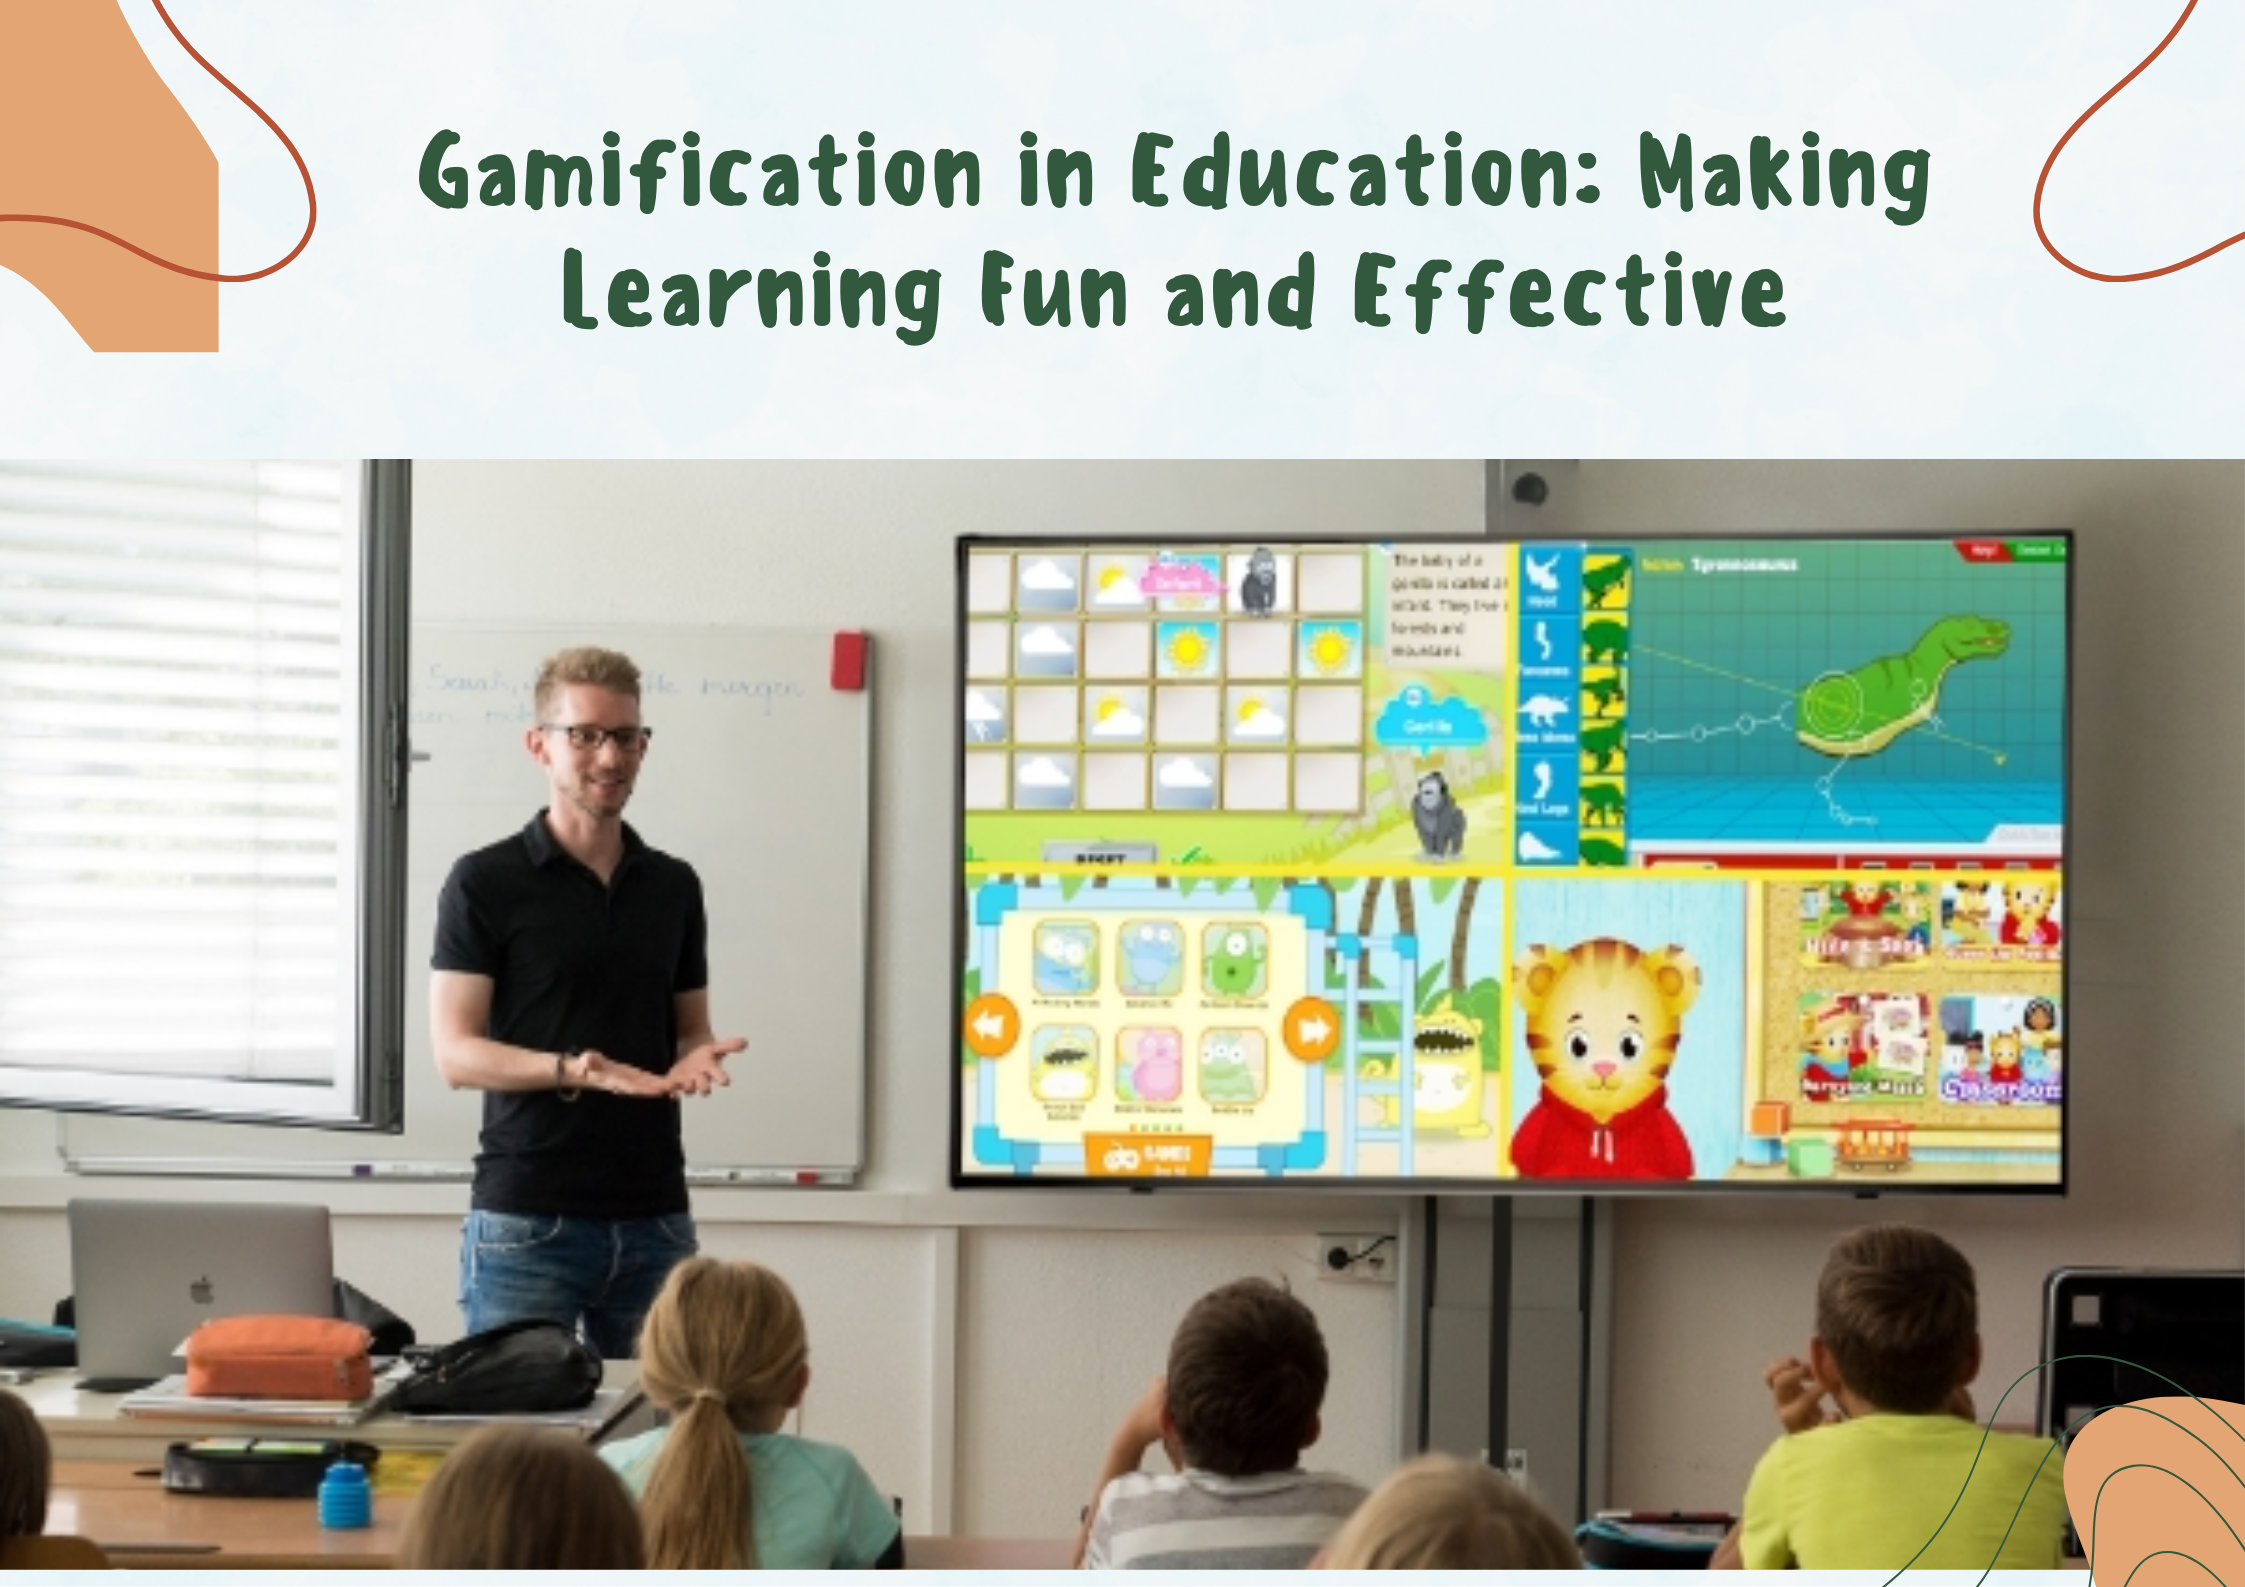 You are currently viewing Gamification in Education: Making Learning Fun and Effective at Ecole Globale